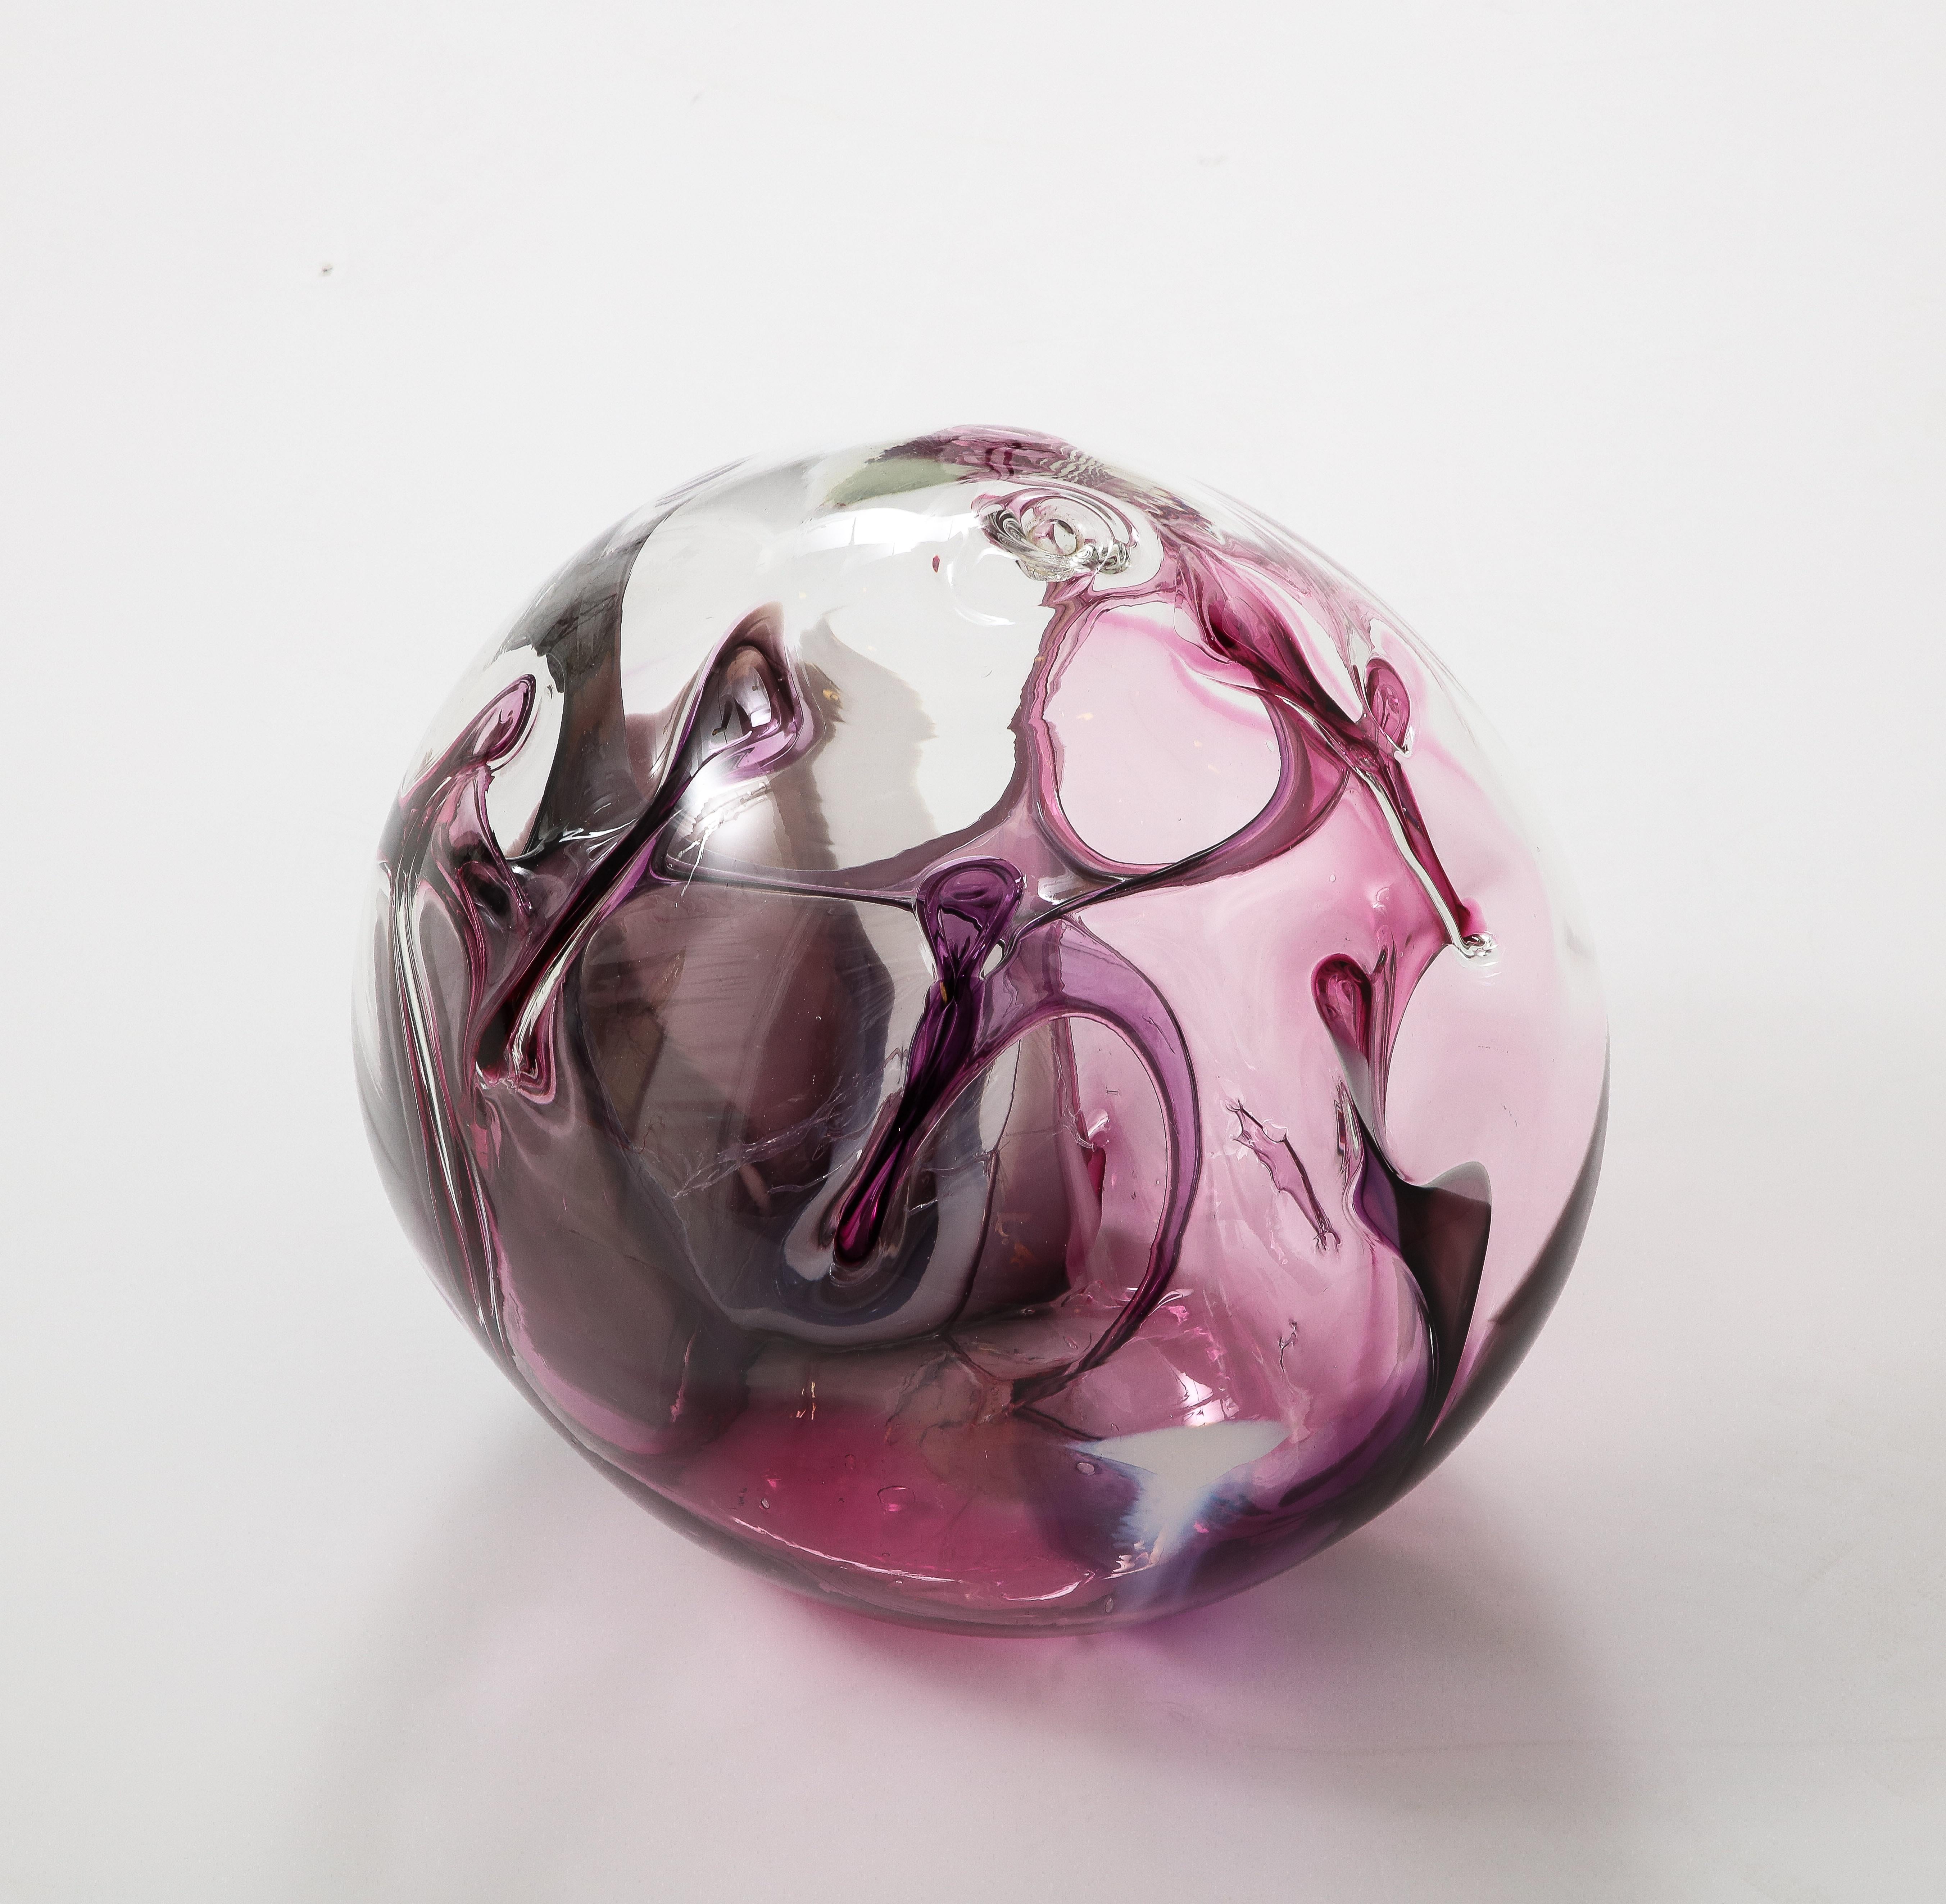 American Extra Large Peter Bramhall Glass Orb Sculpture, Signed. For Sale